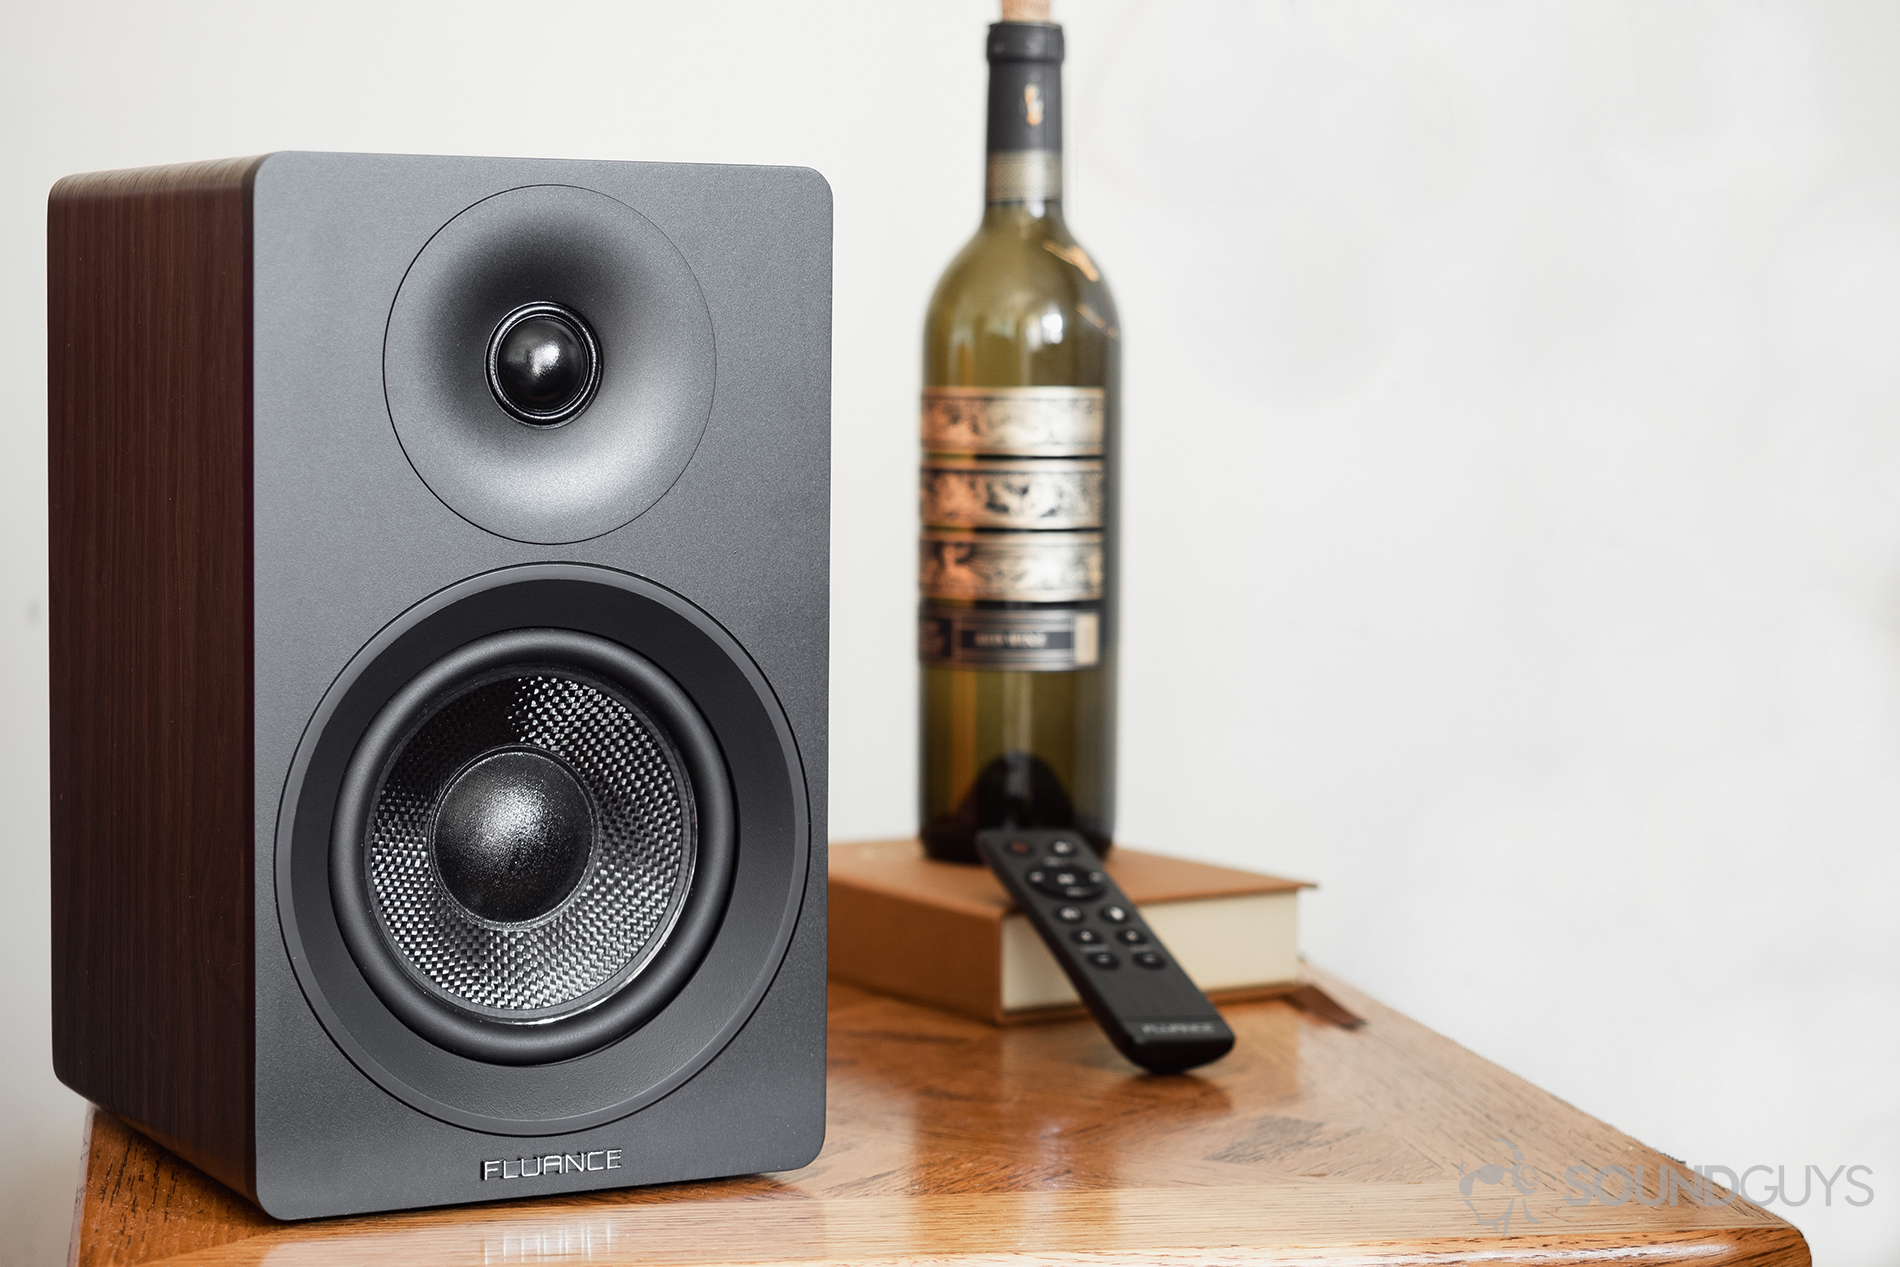 Fluance Ai40 review: The passive speaker on a table with a wine bottle in the background and the remote.